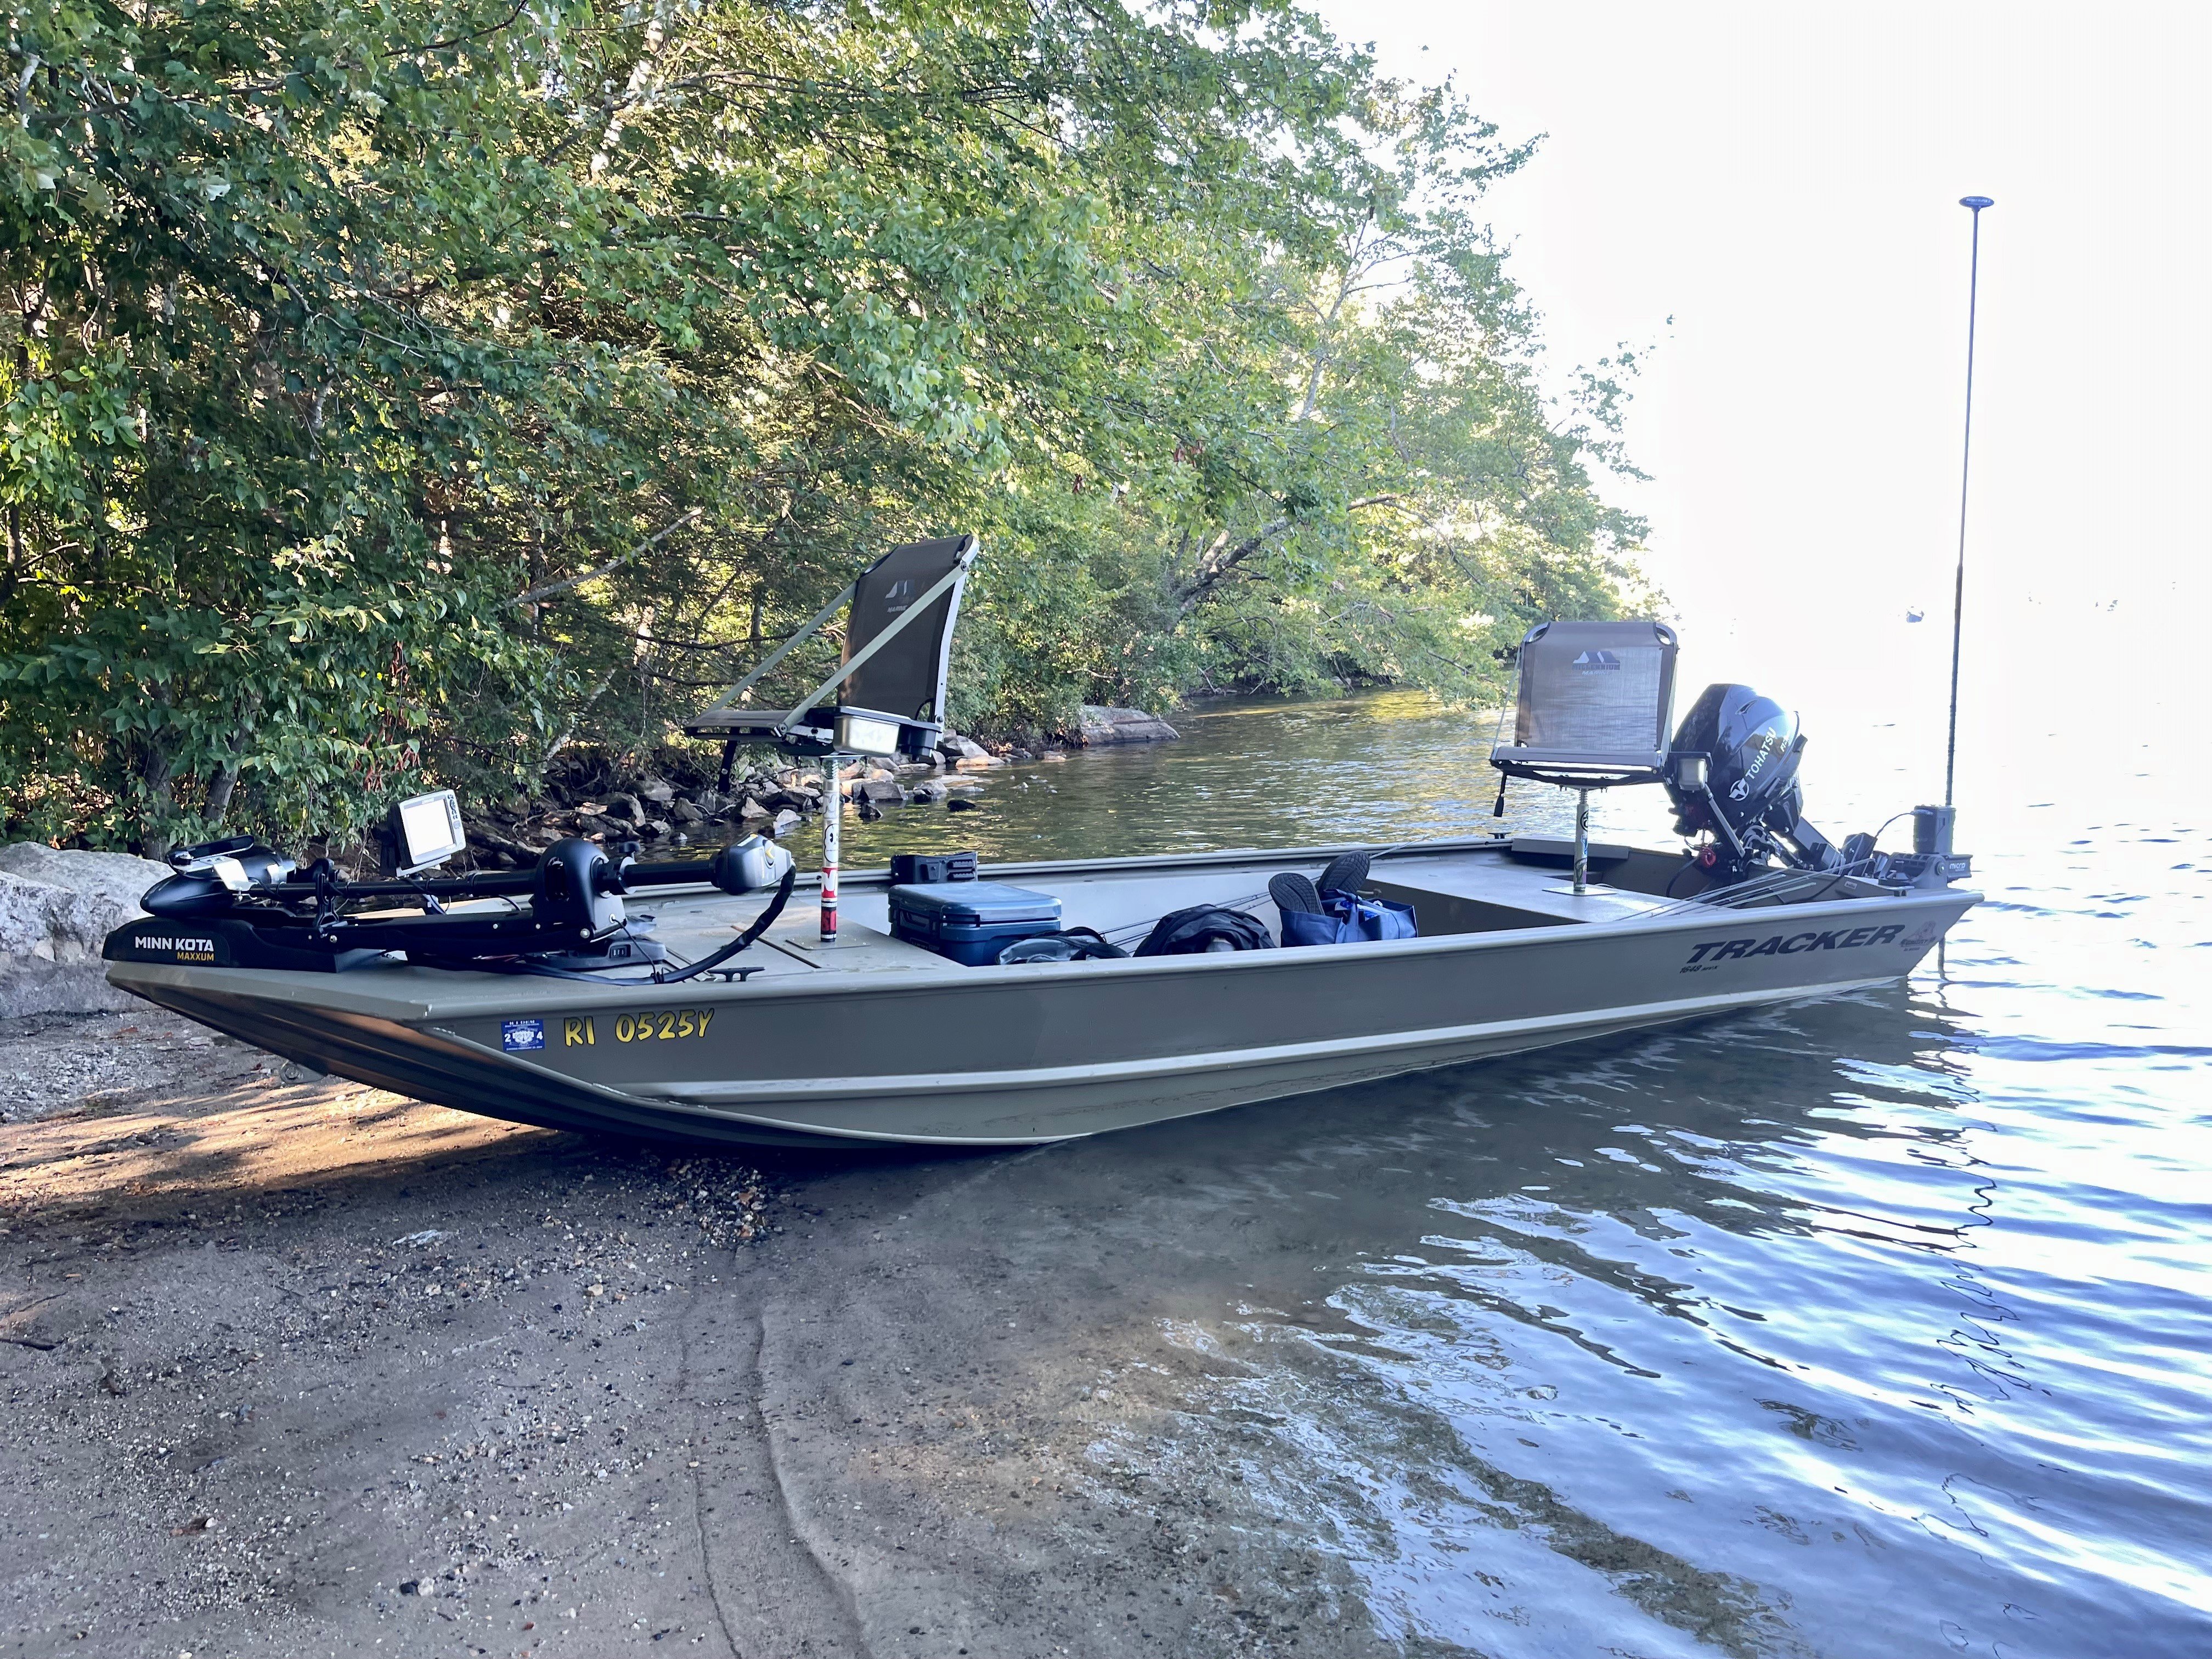 New Boat Build-Tracker Grizzly 1648 - The Underground - Swimbait